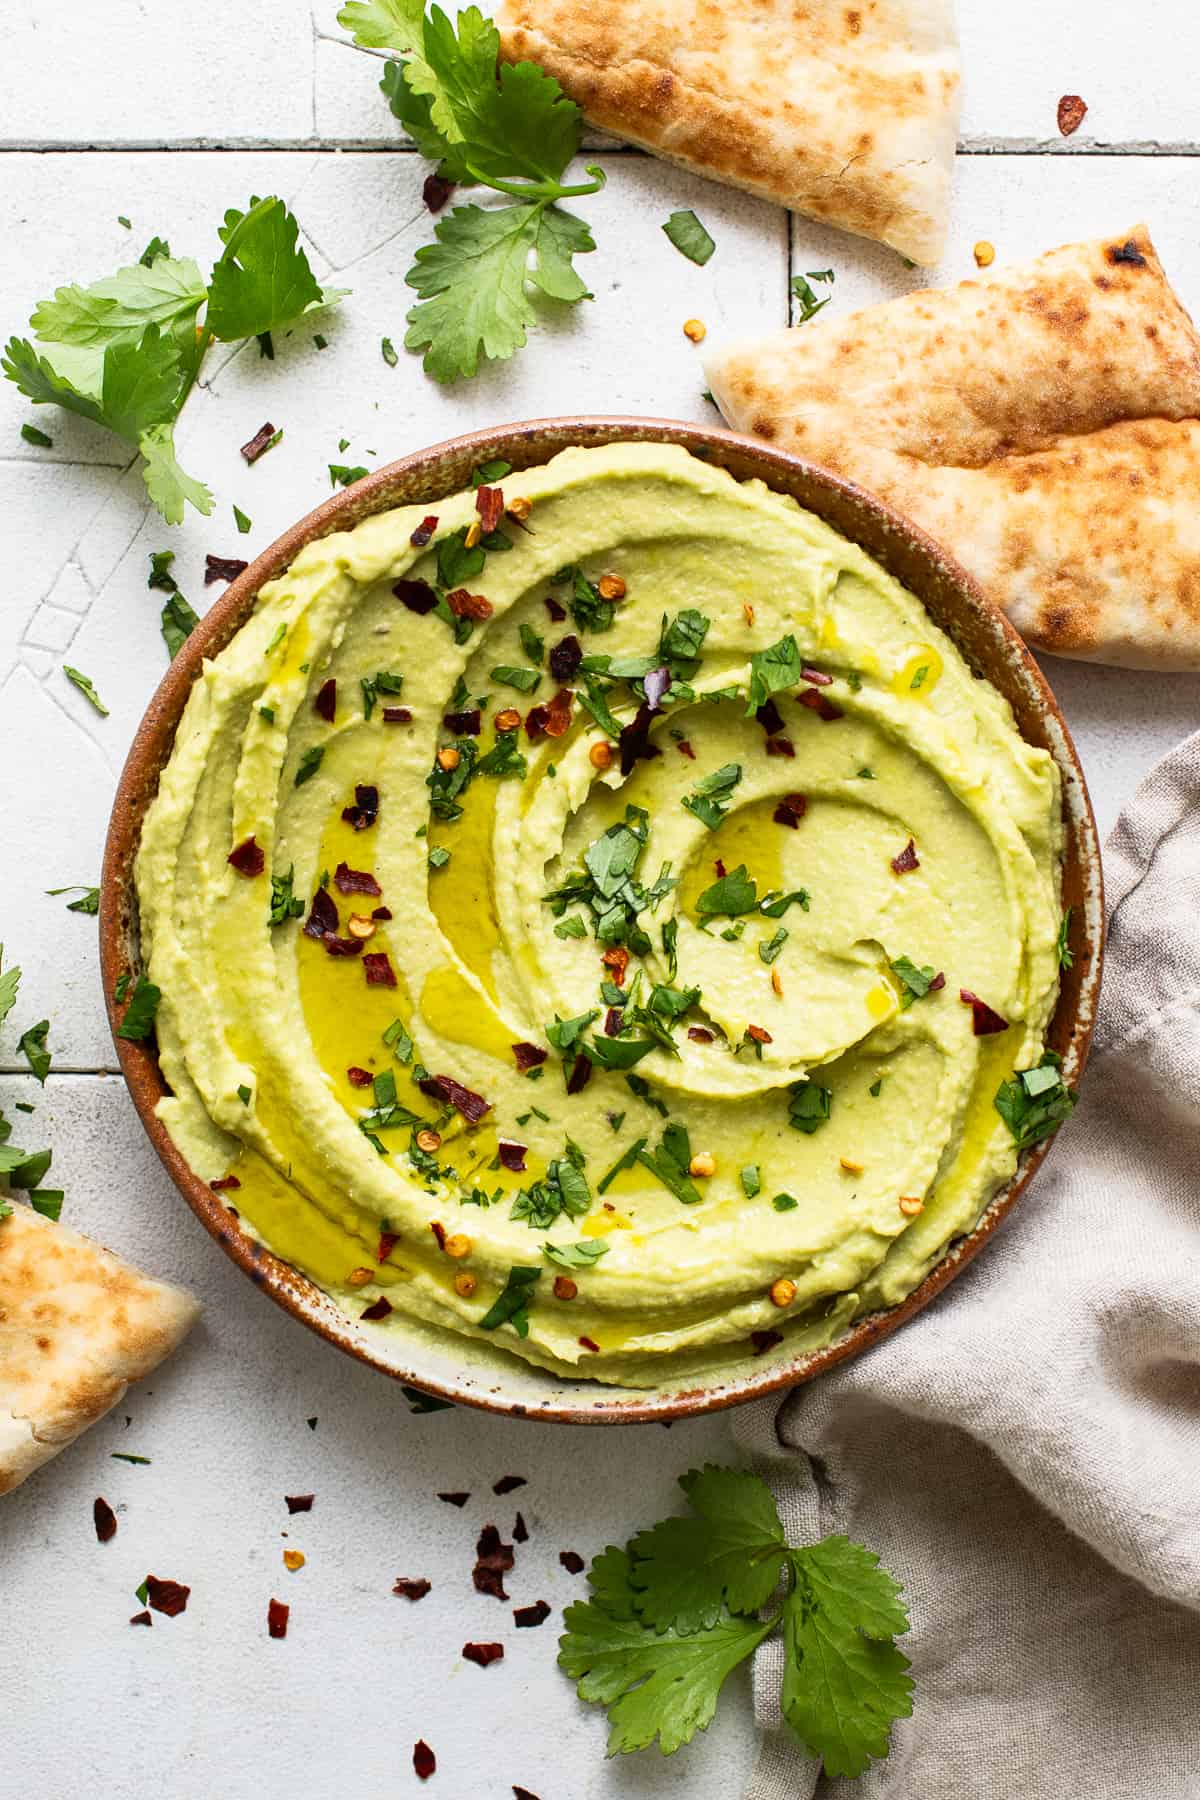 Avocado hummus in a ceramic serving bowl drizzled with olive oil and garnished with chopped cilantro and red pepper flakes.